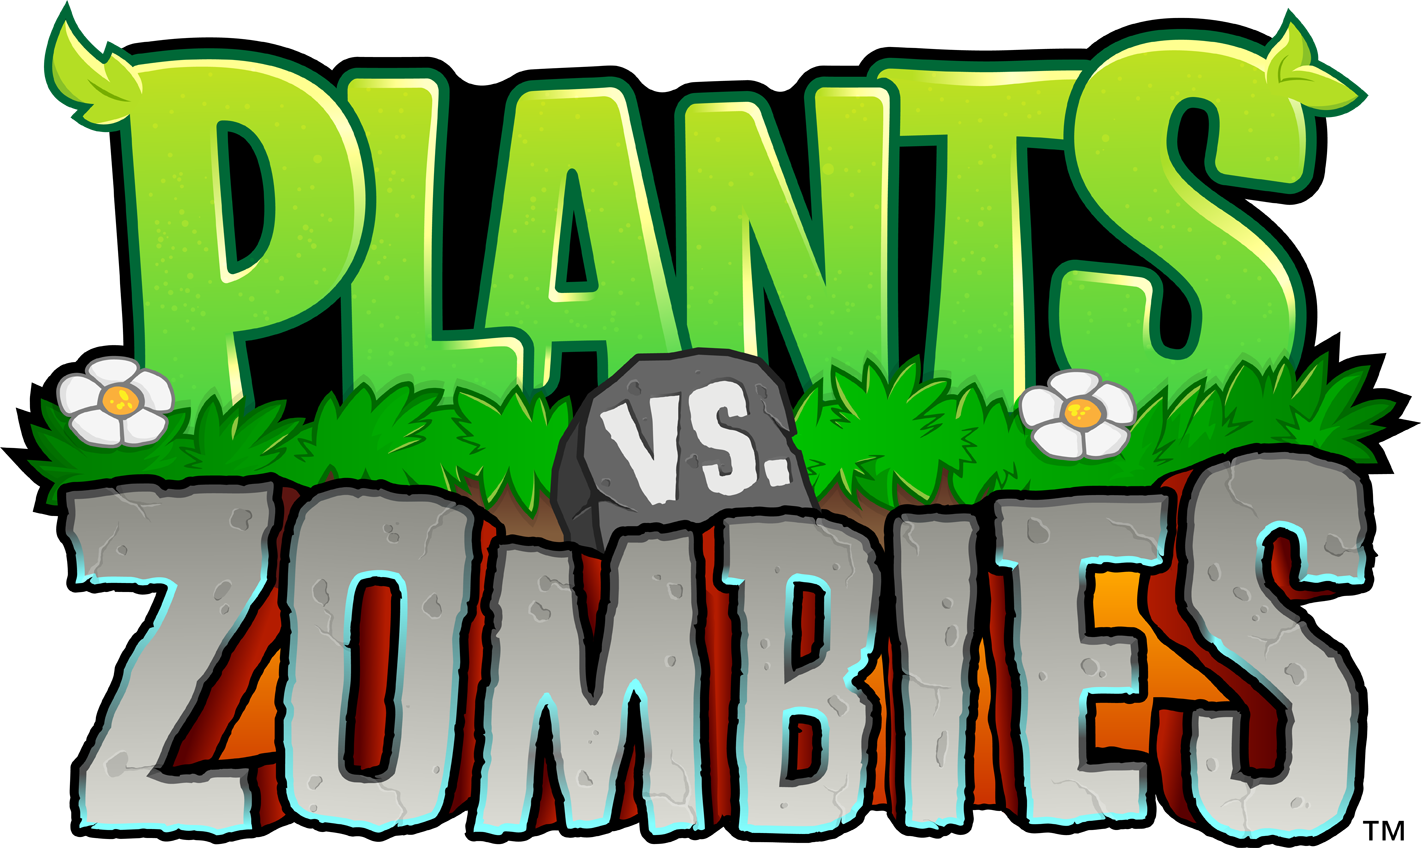 Download Plants vs Zombies - Free PC Game